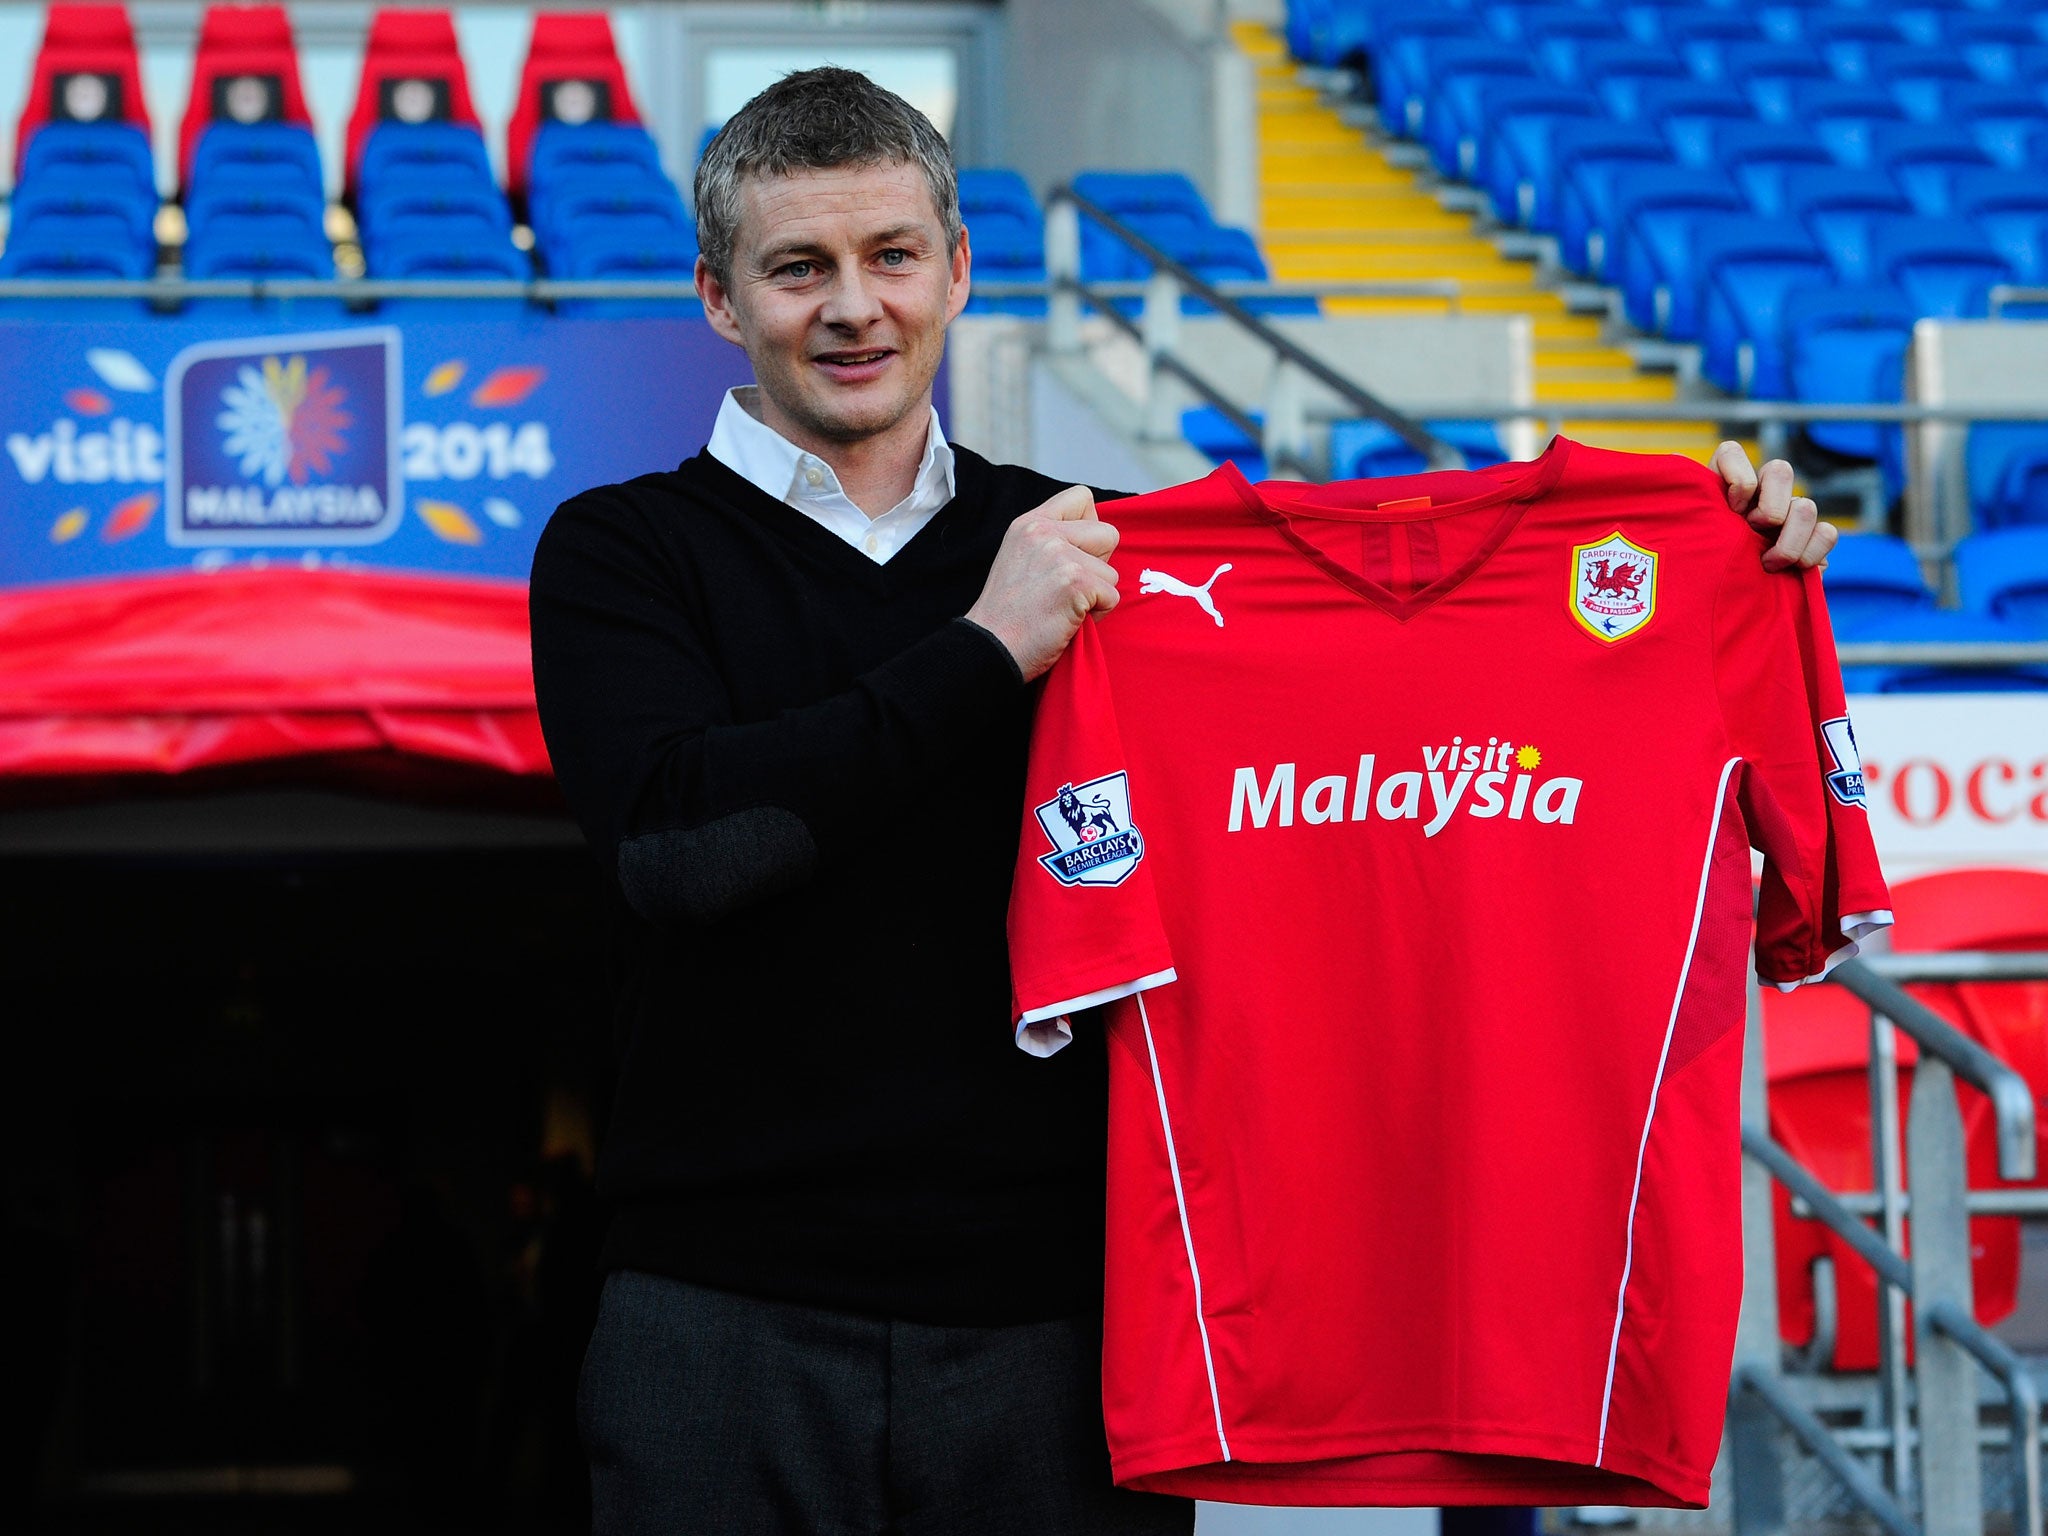 Ole Gunnar Solskjaer is presented as the new manager of Cardiff City